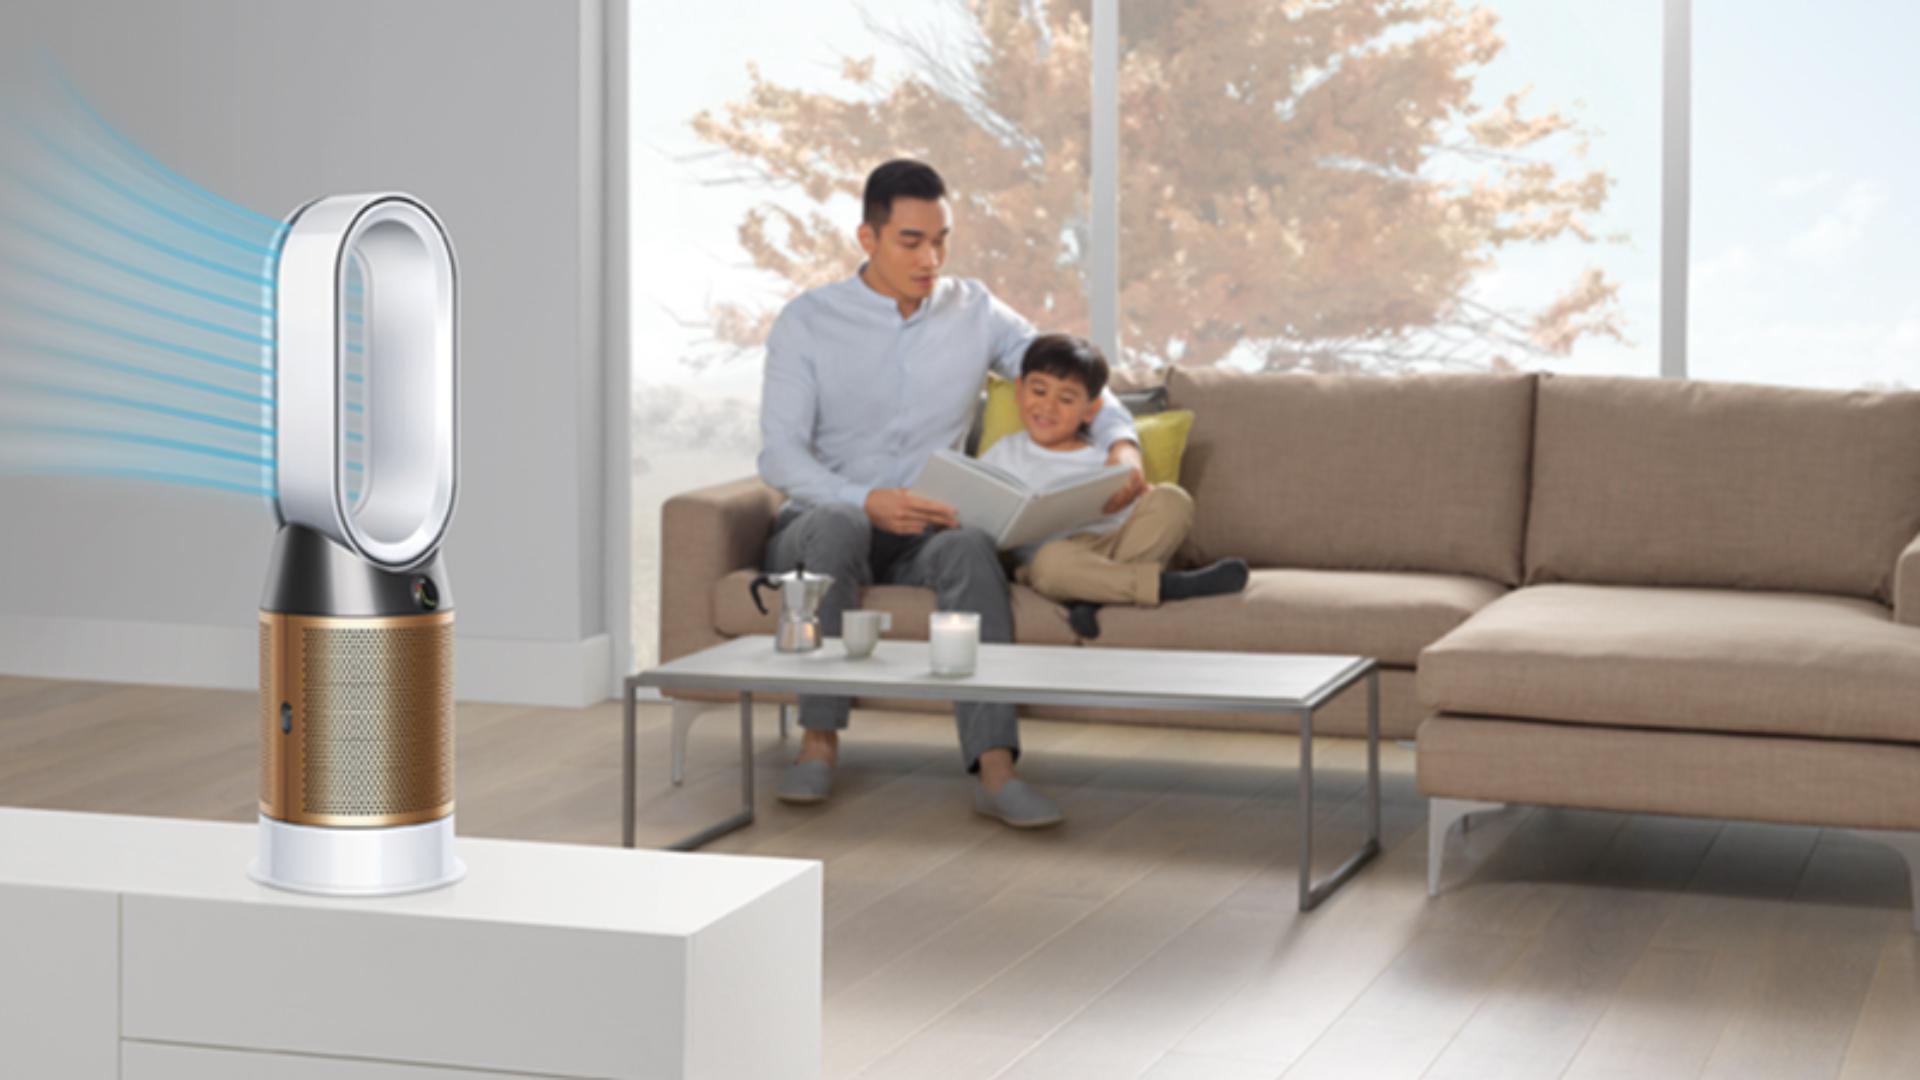 A family relax as airflow diverts through the back of the fan in Diffused mode.